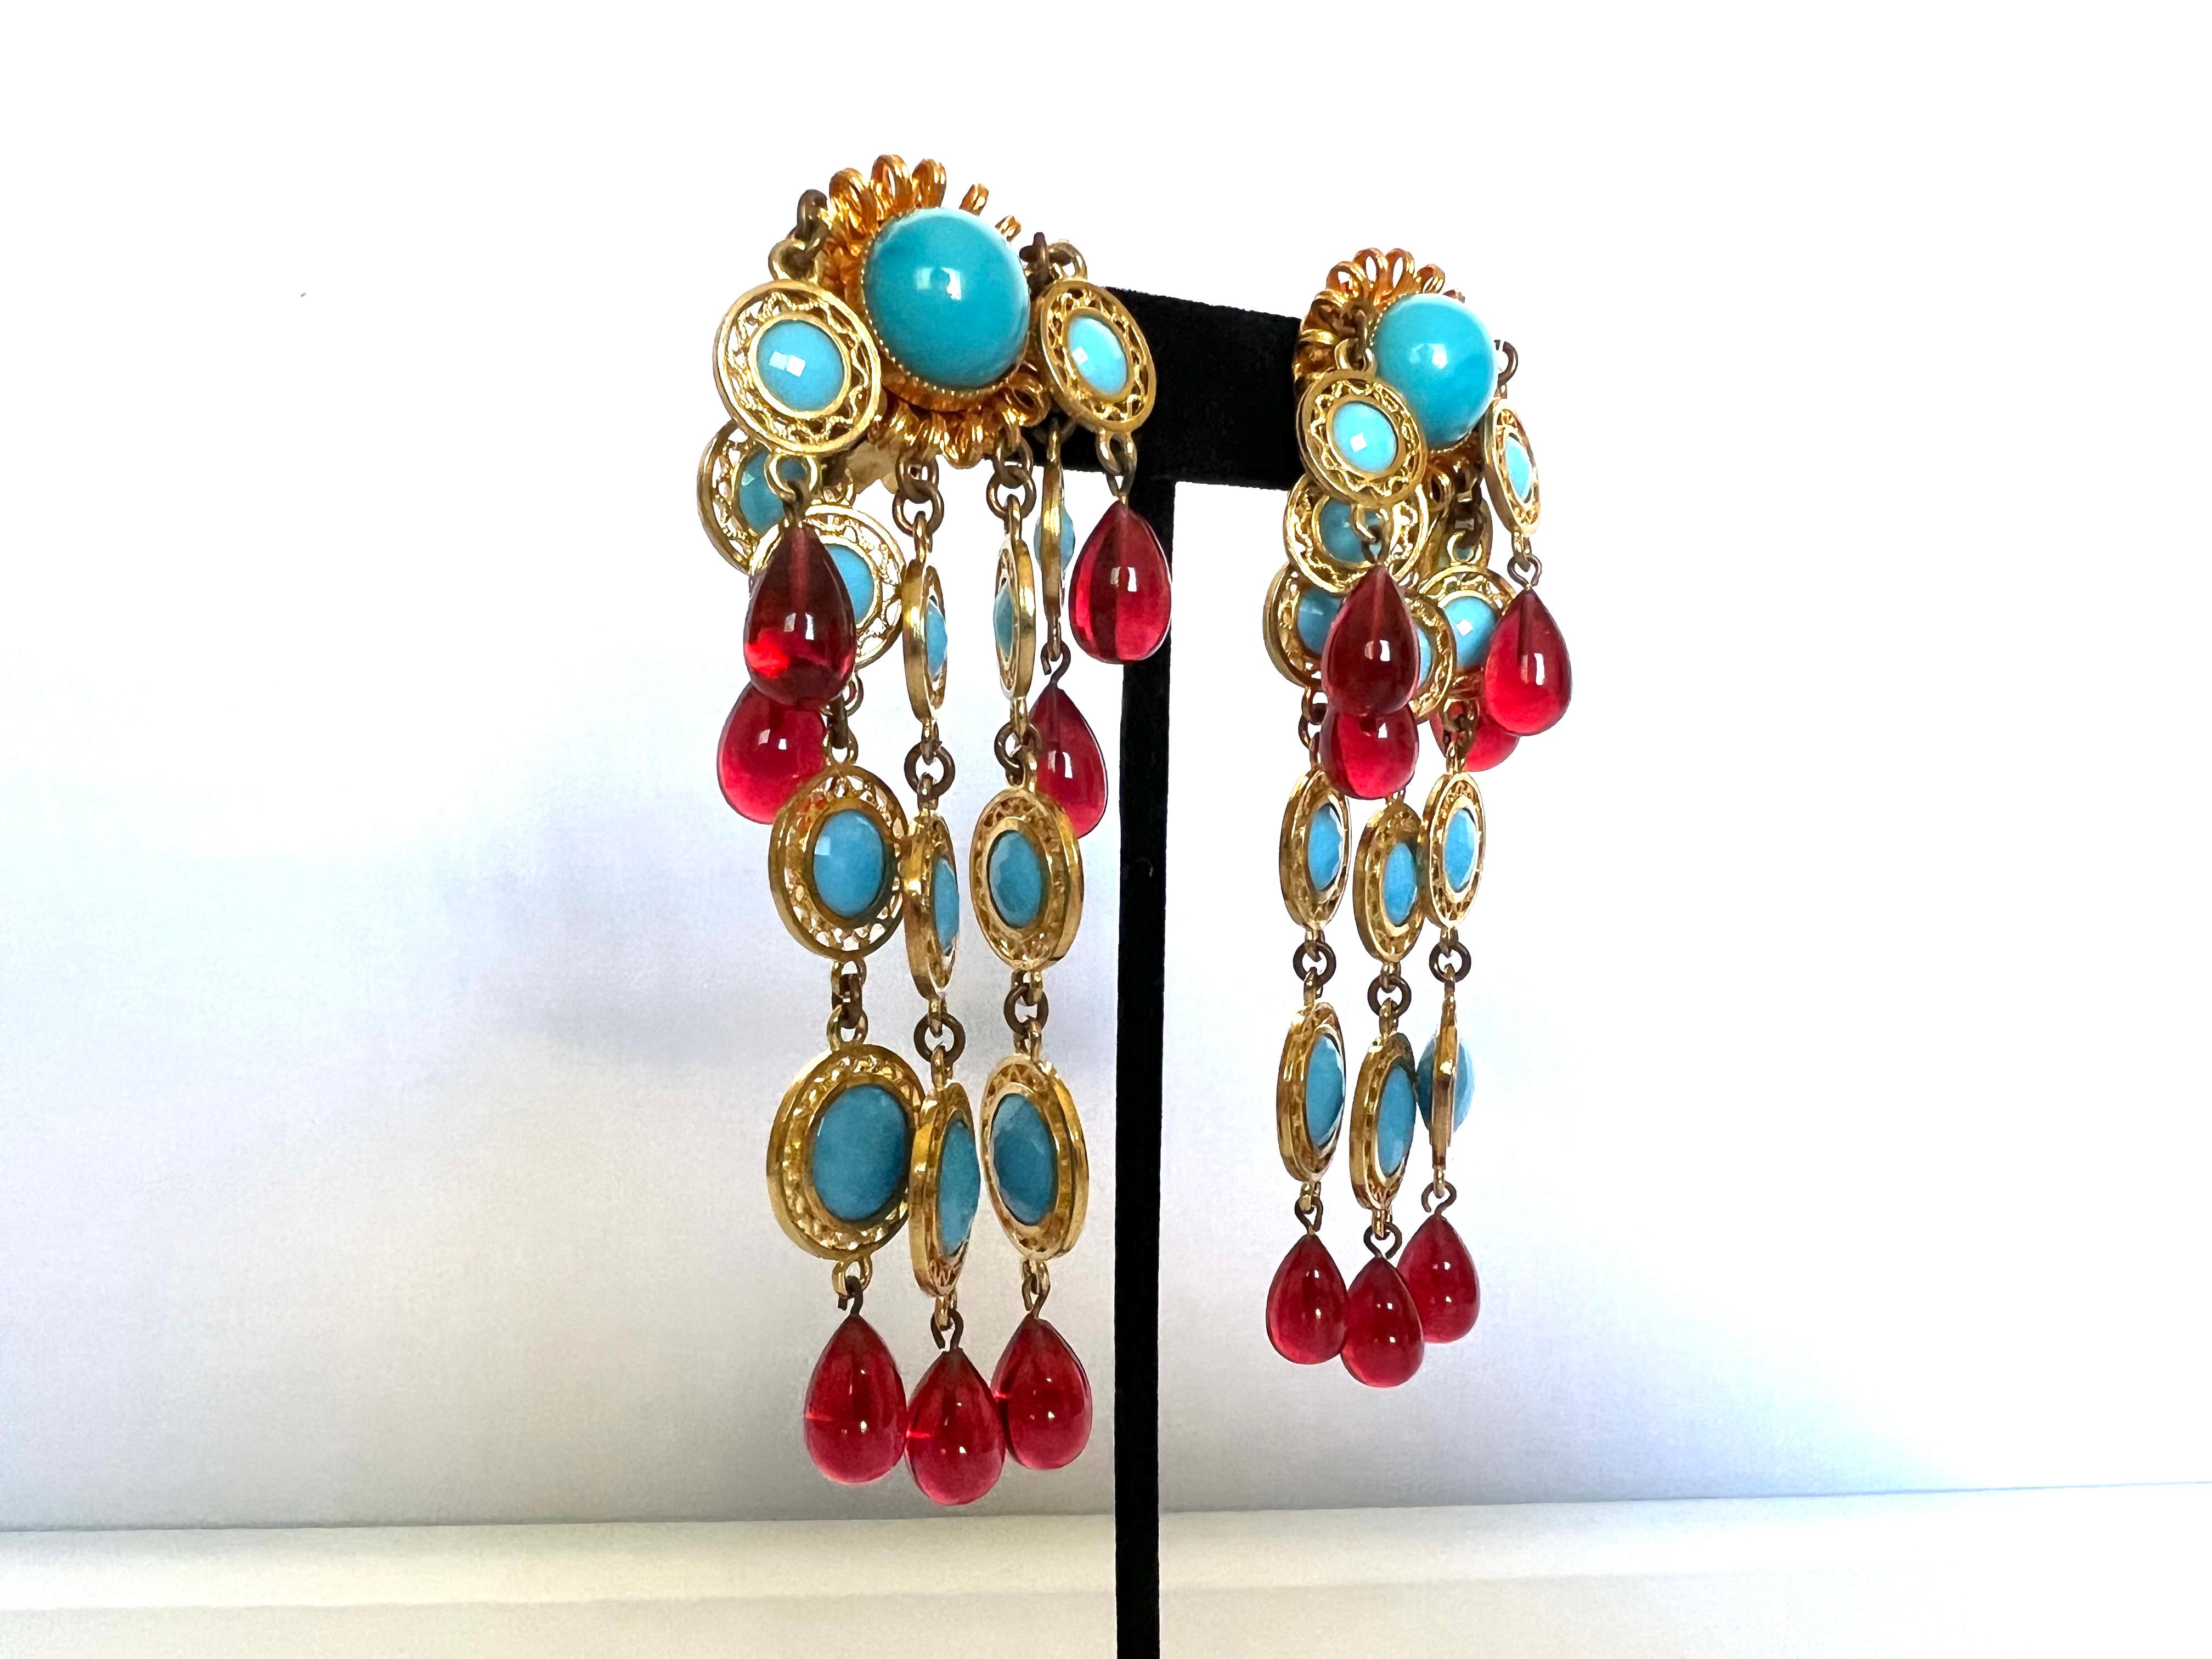 Bead Vintage Faux Ruby and Turquoise Chandelier Earrings by William de Lillo  For Sale